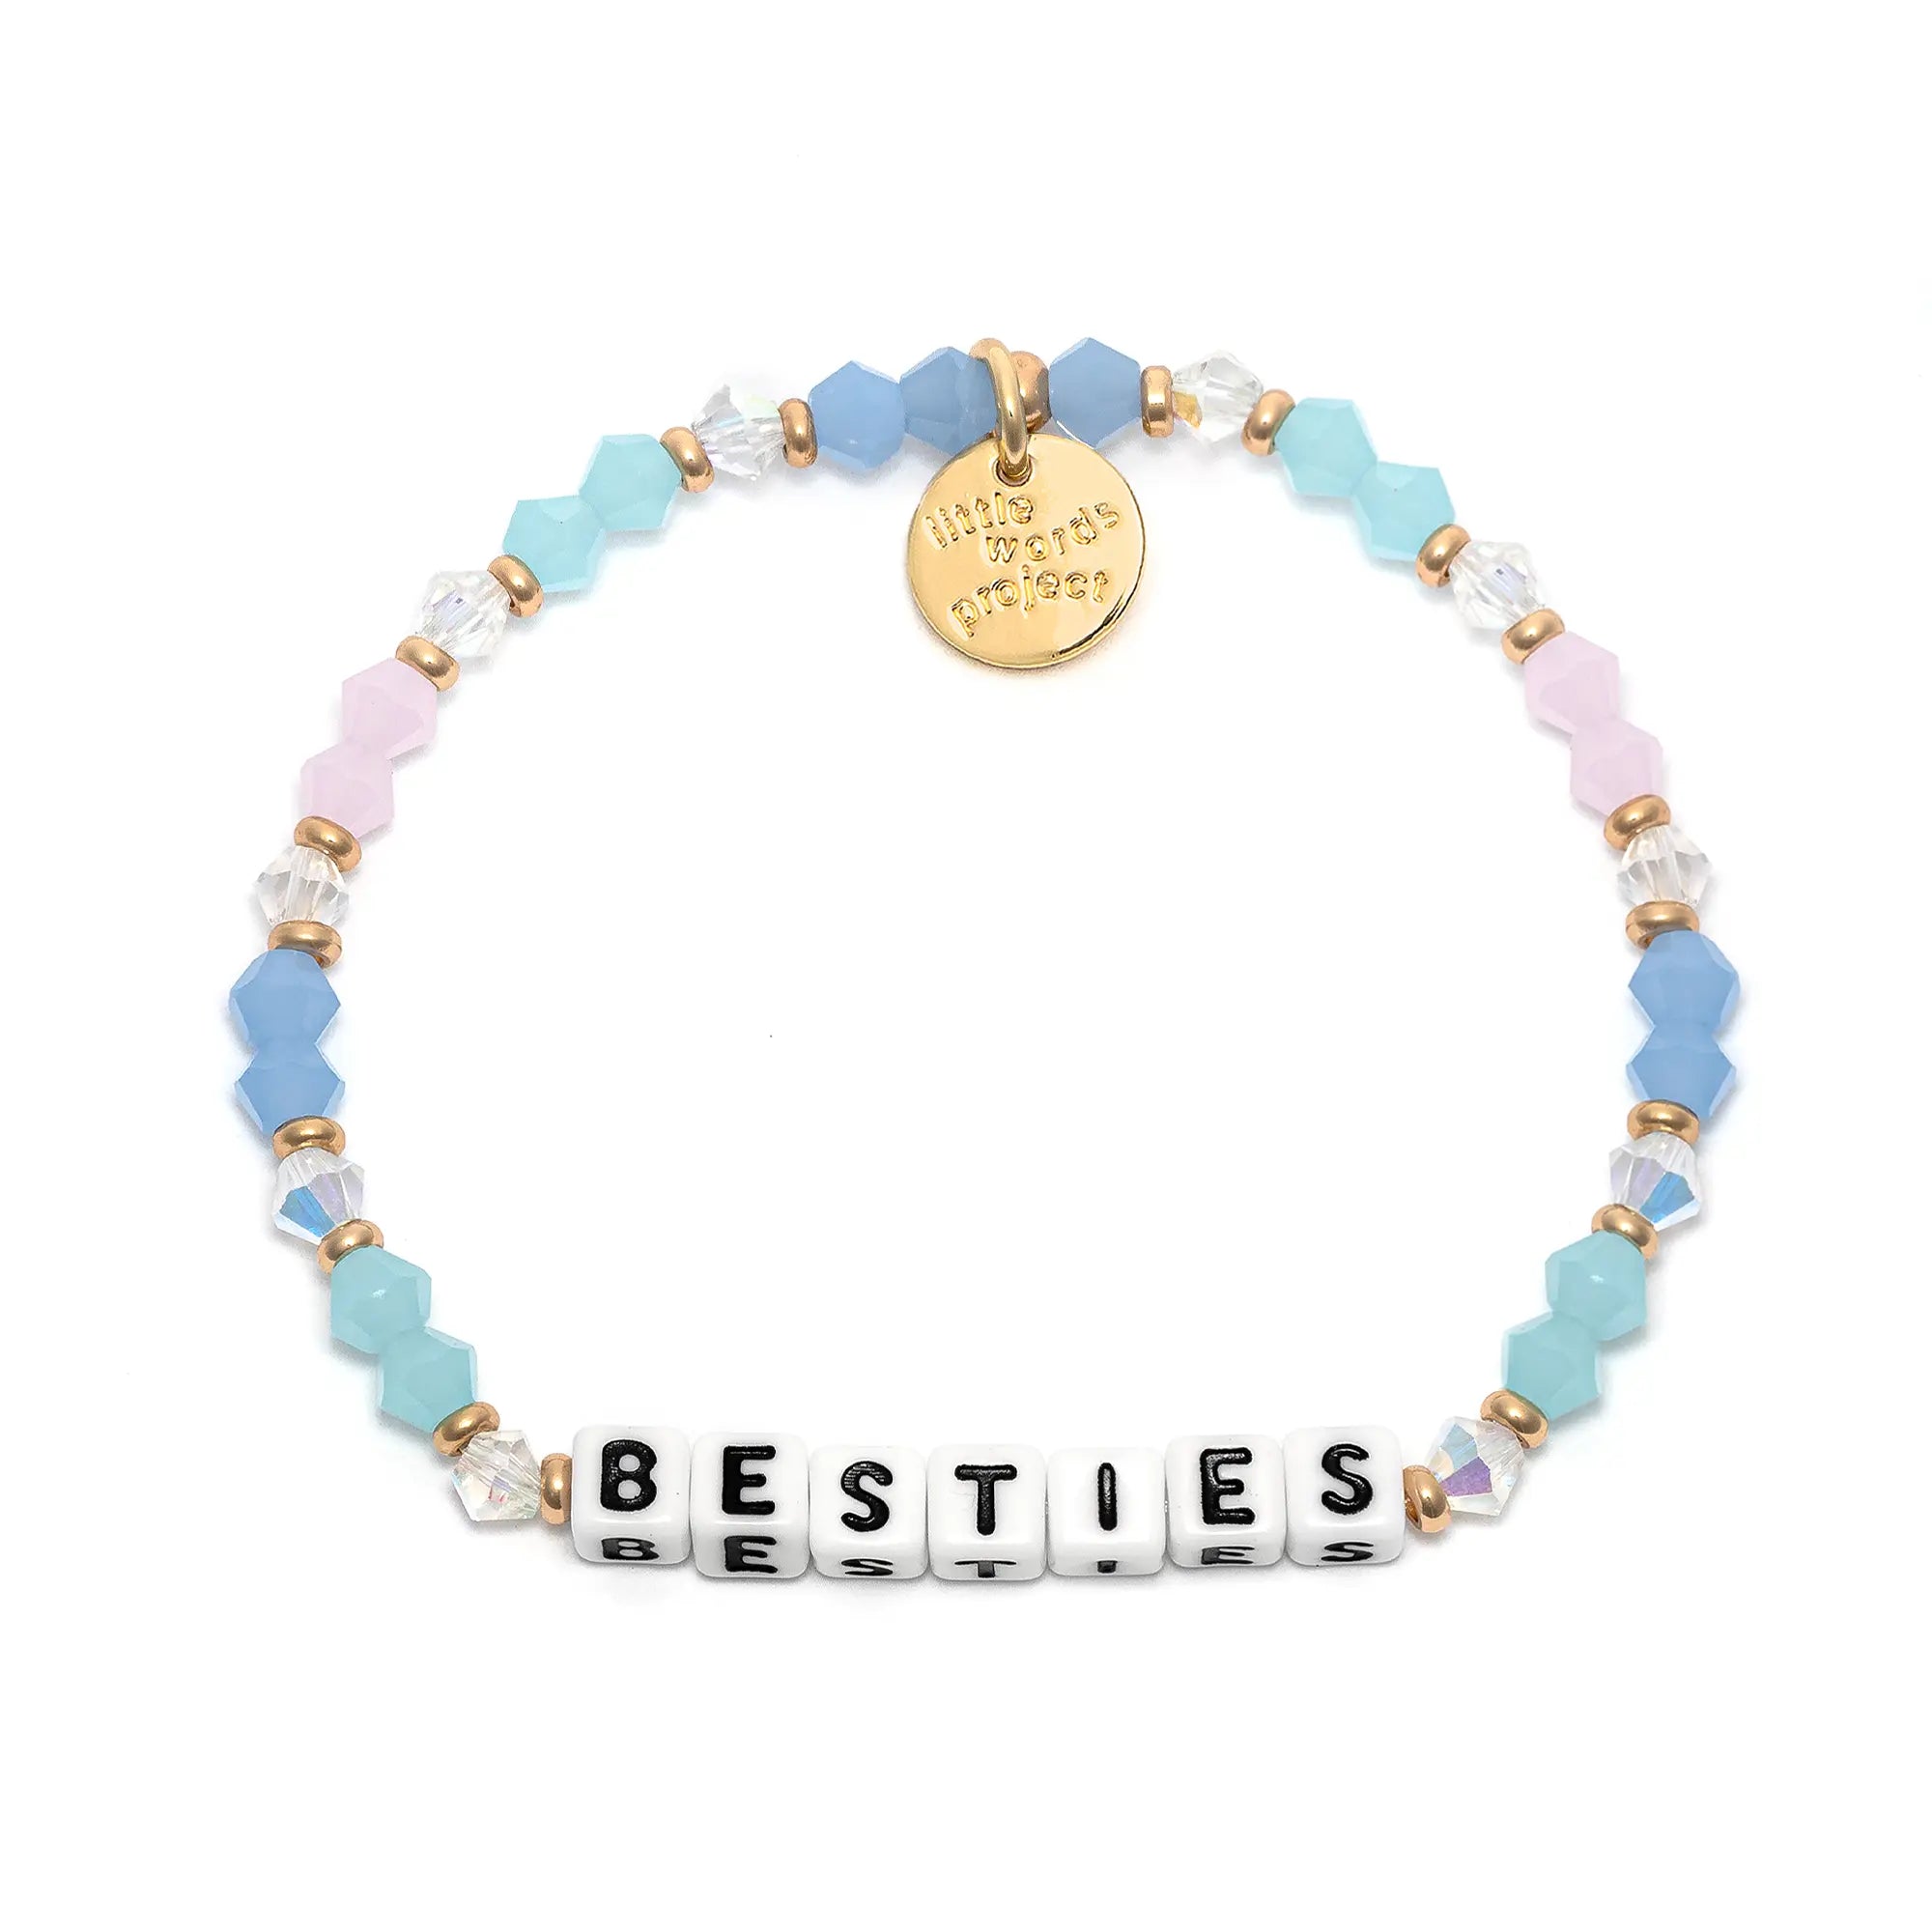 Besties Cotton Candy Bracelet S/M - LWP – Occasionally Yours